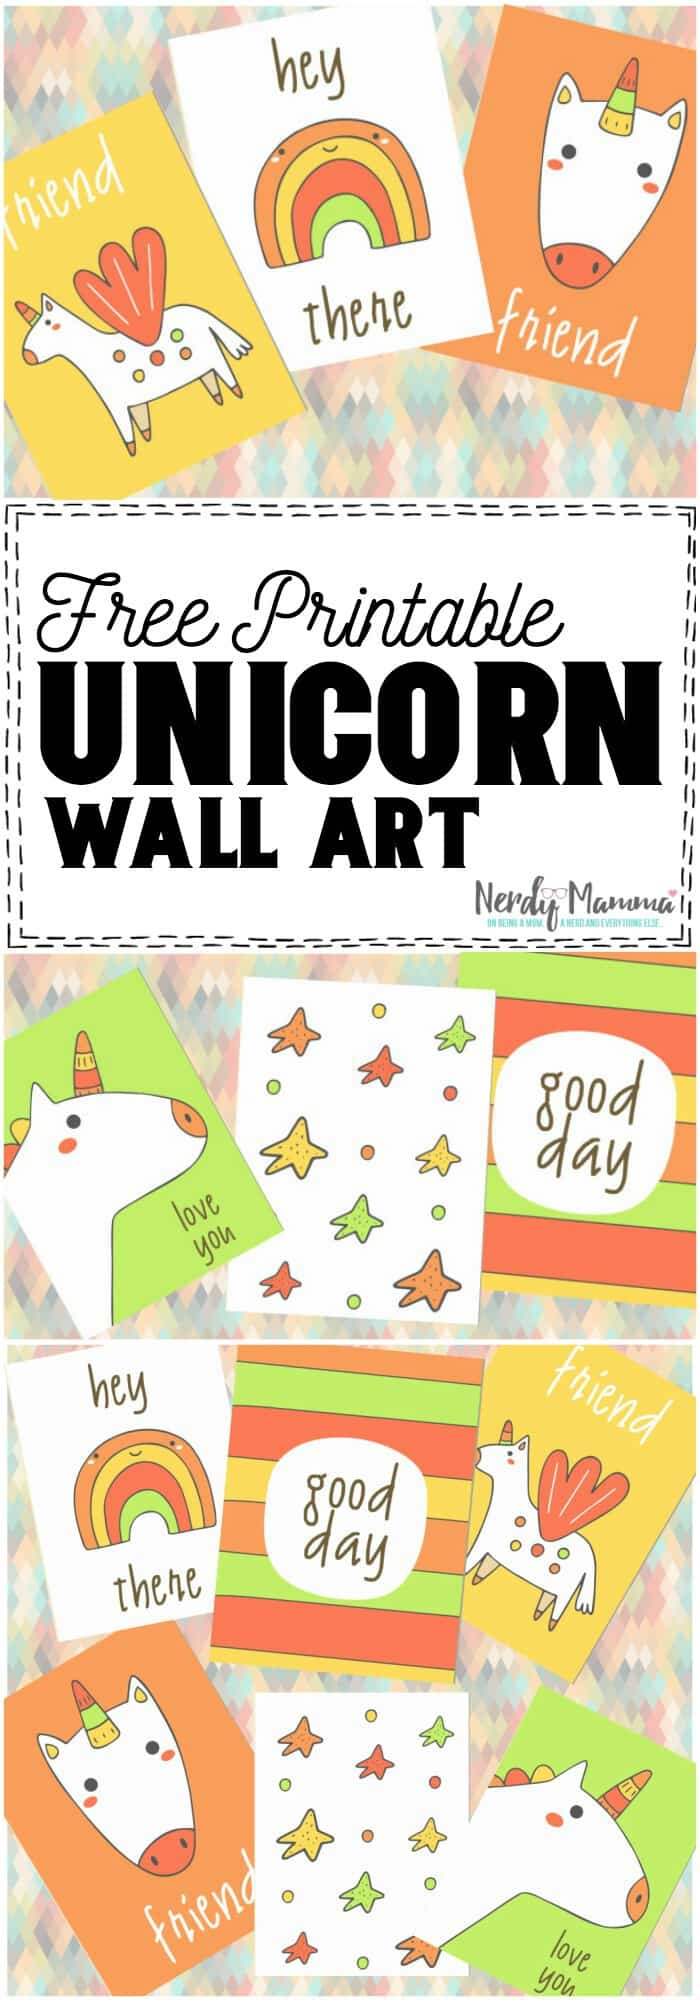 Super ridiculously cute Free Printable Unicorn Wall Art for the funtastic girl's bedroom or bathroom or whatever. Just print it and put it on the wall--anywhere. #unicorn #free #freeprintable #printable #cute